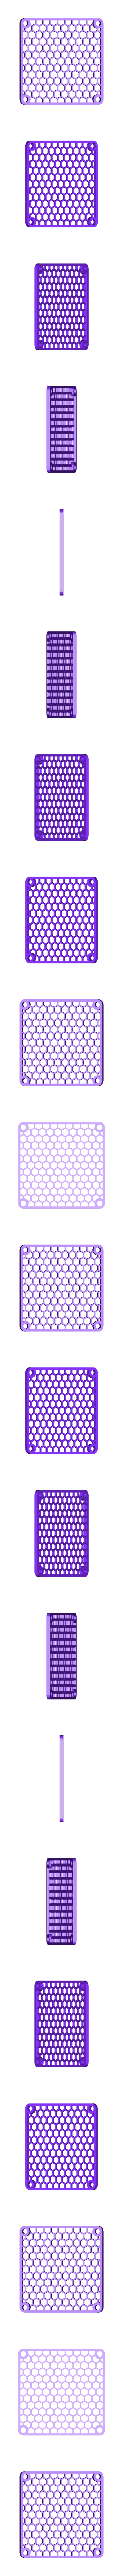 70mm_honeycomb_reduced_fan_cover.stl Download free STL file Customizable Fan Grill Cover • 3D print design, MightyNozzle